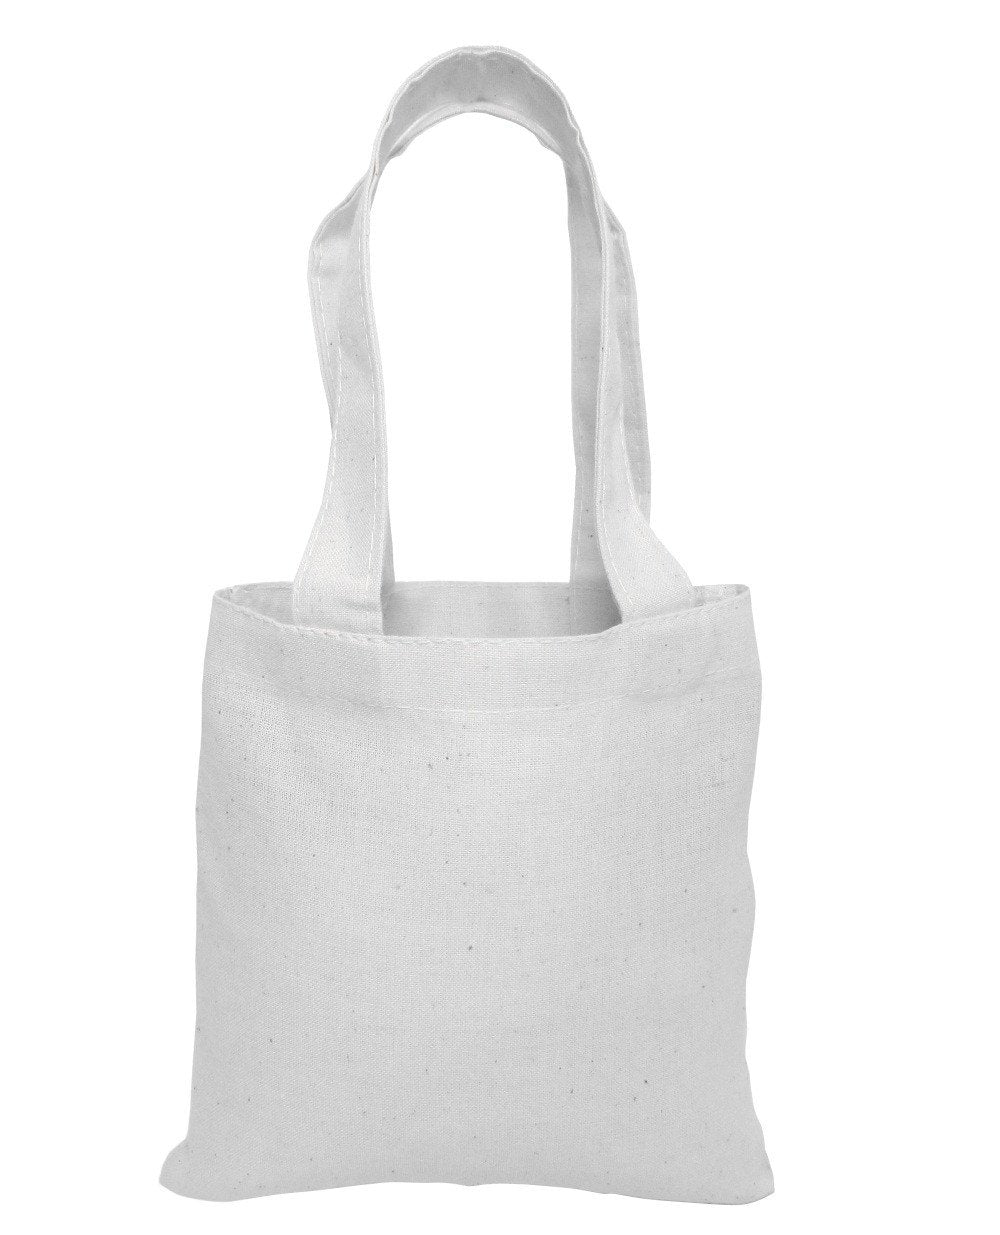 6" MINI Cotton Tote Bag with Fabric Handles